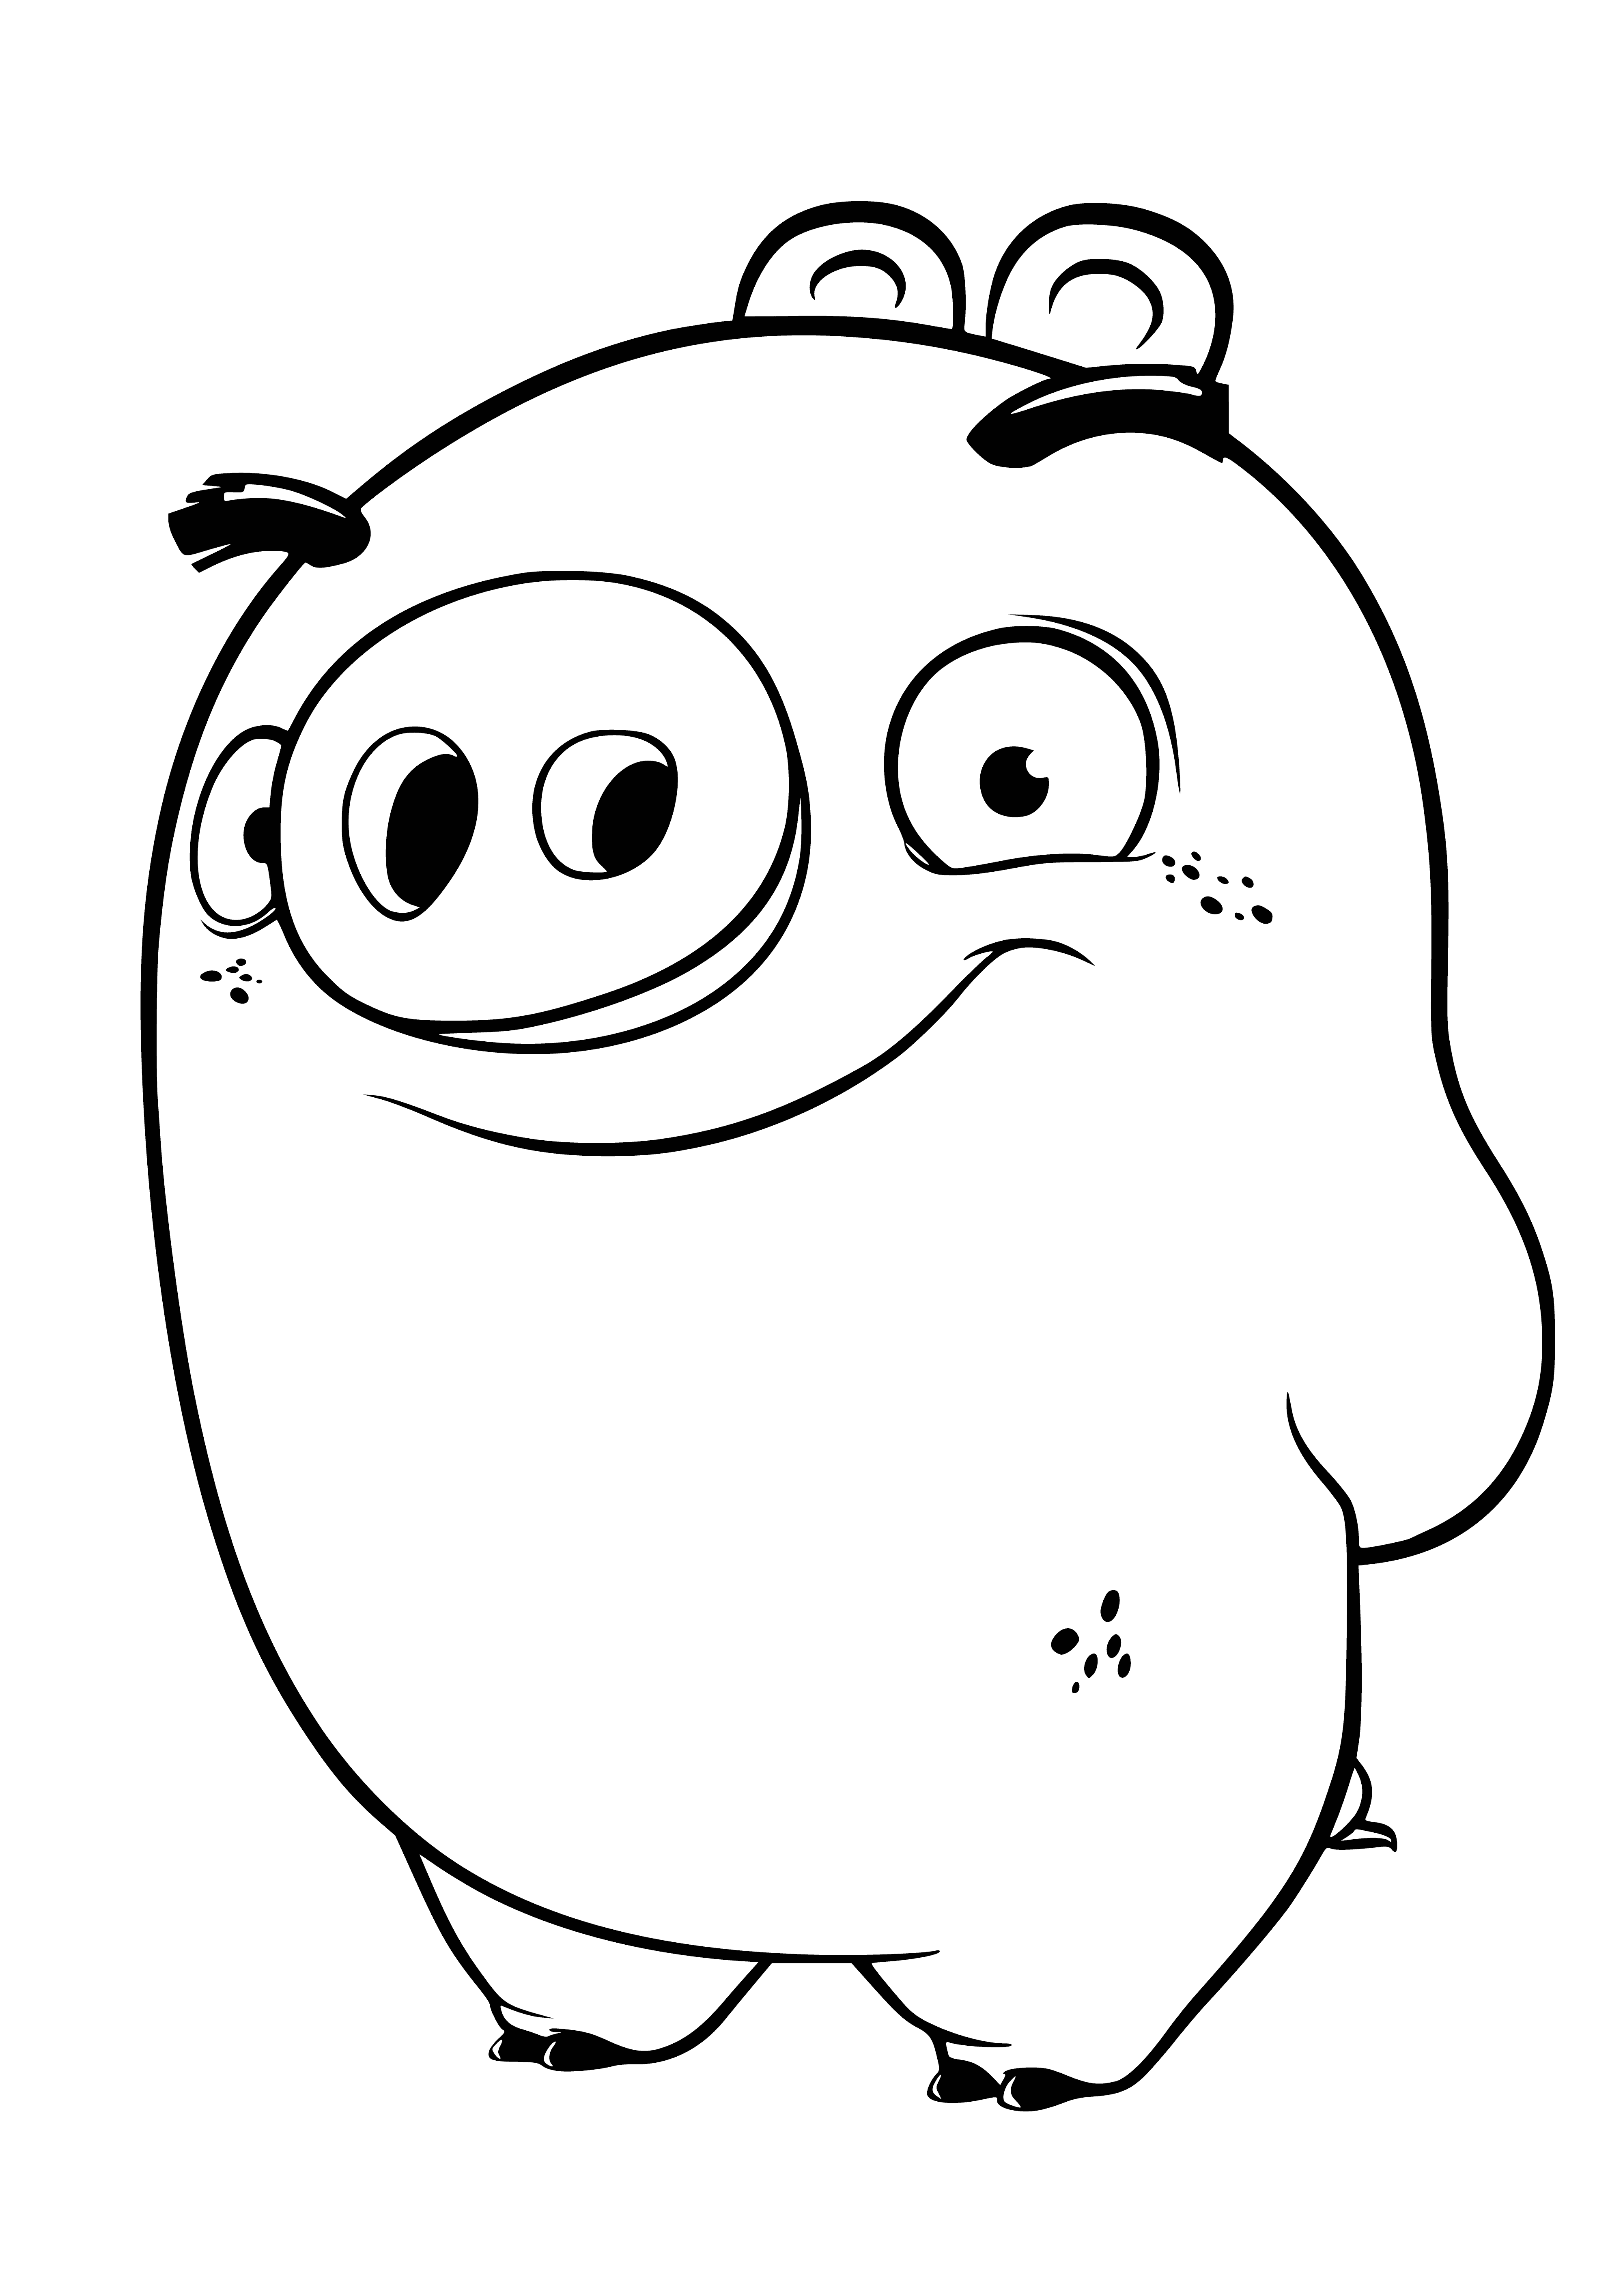 coloring page: A Minion Pig Ross is surrounded by Angry Birds, scared with arms up in the air. #MinionPigRoss #AngryBirds